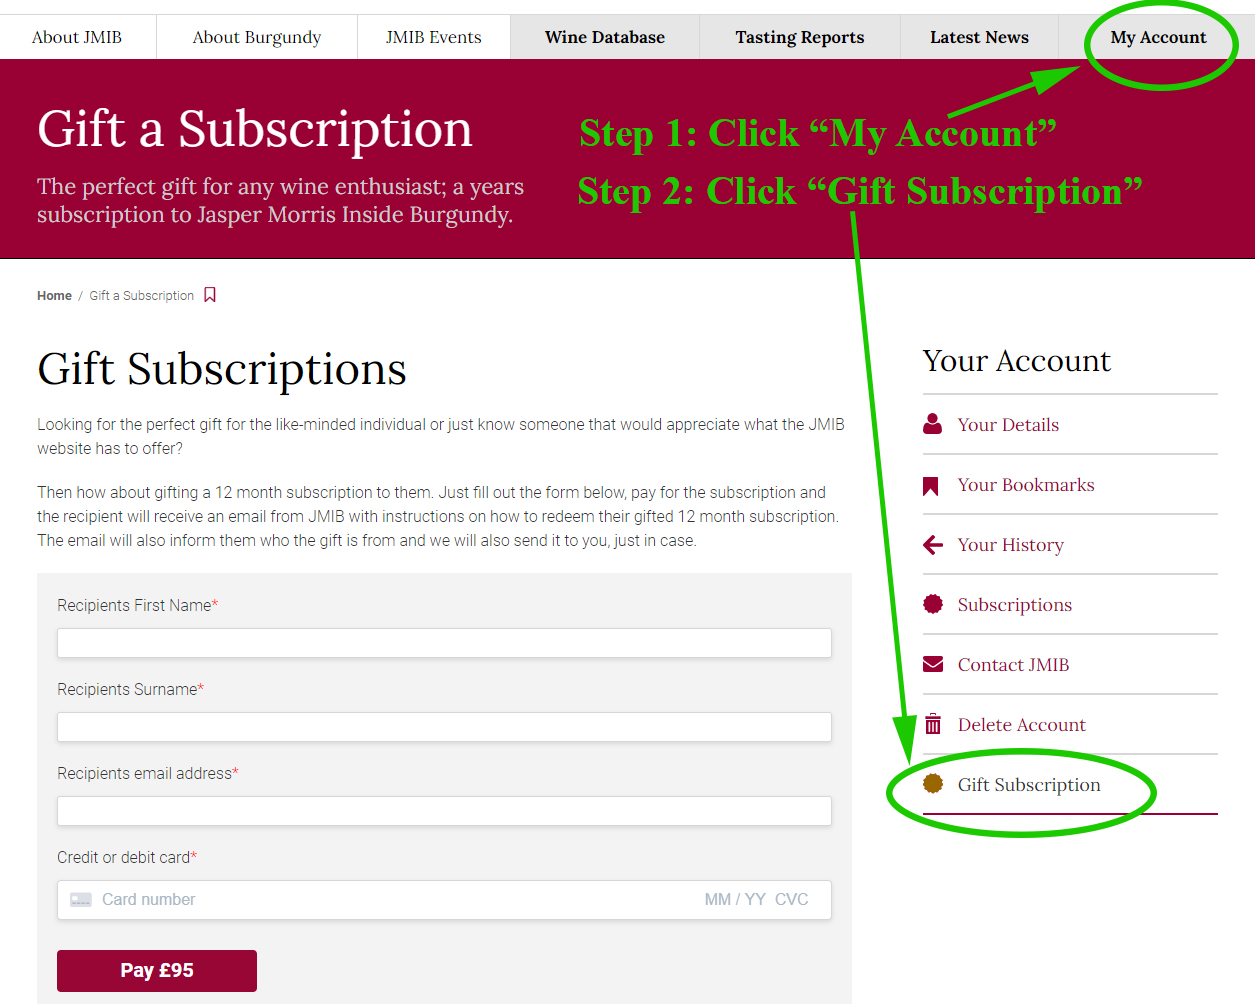 How to Gift a Subscription